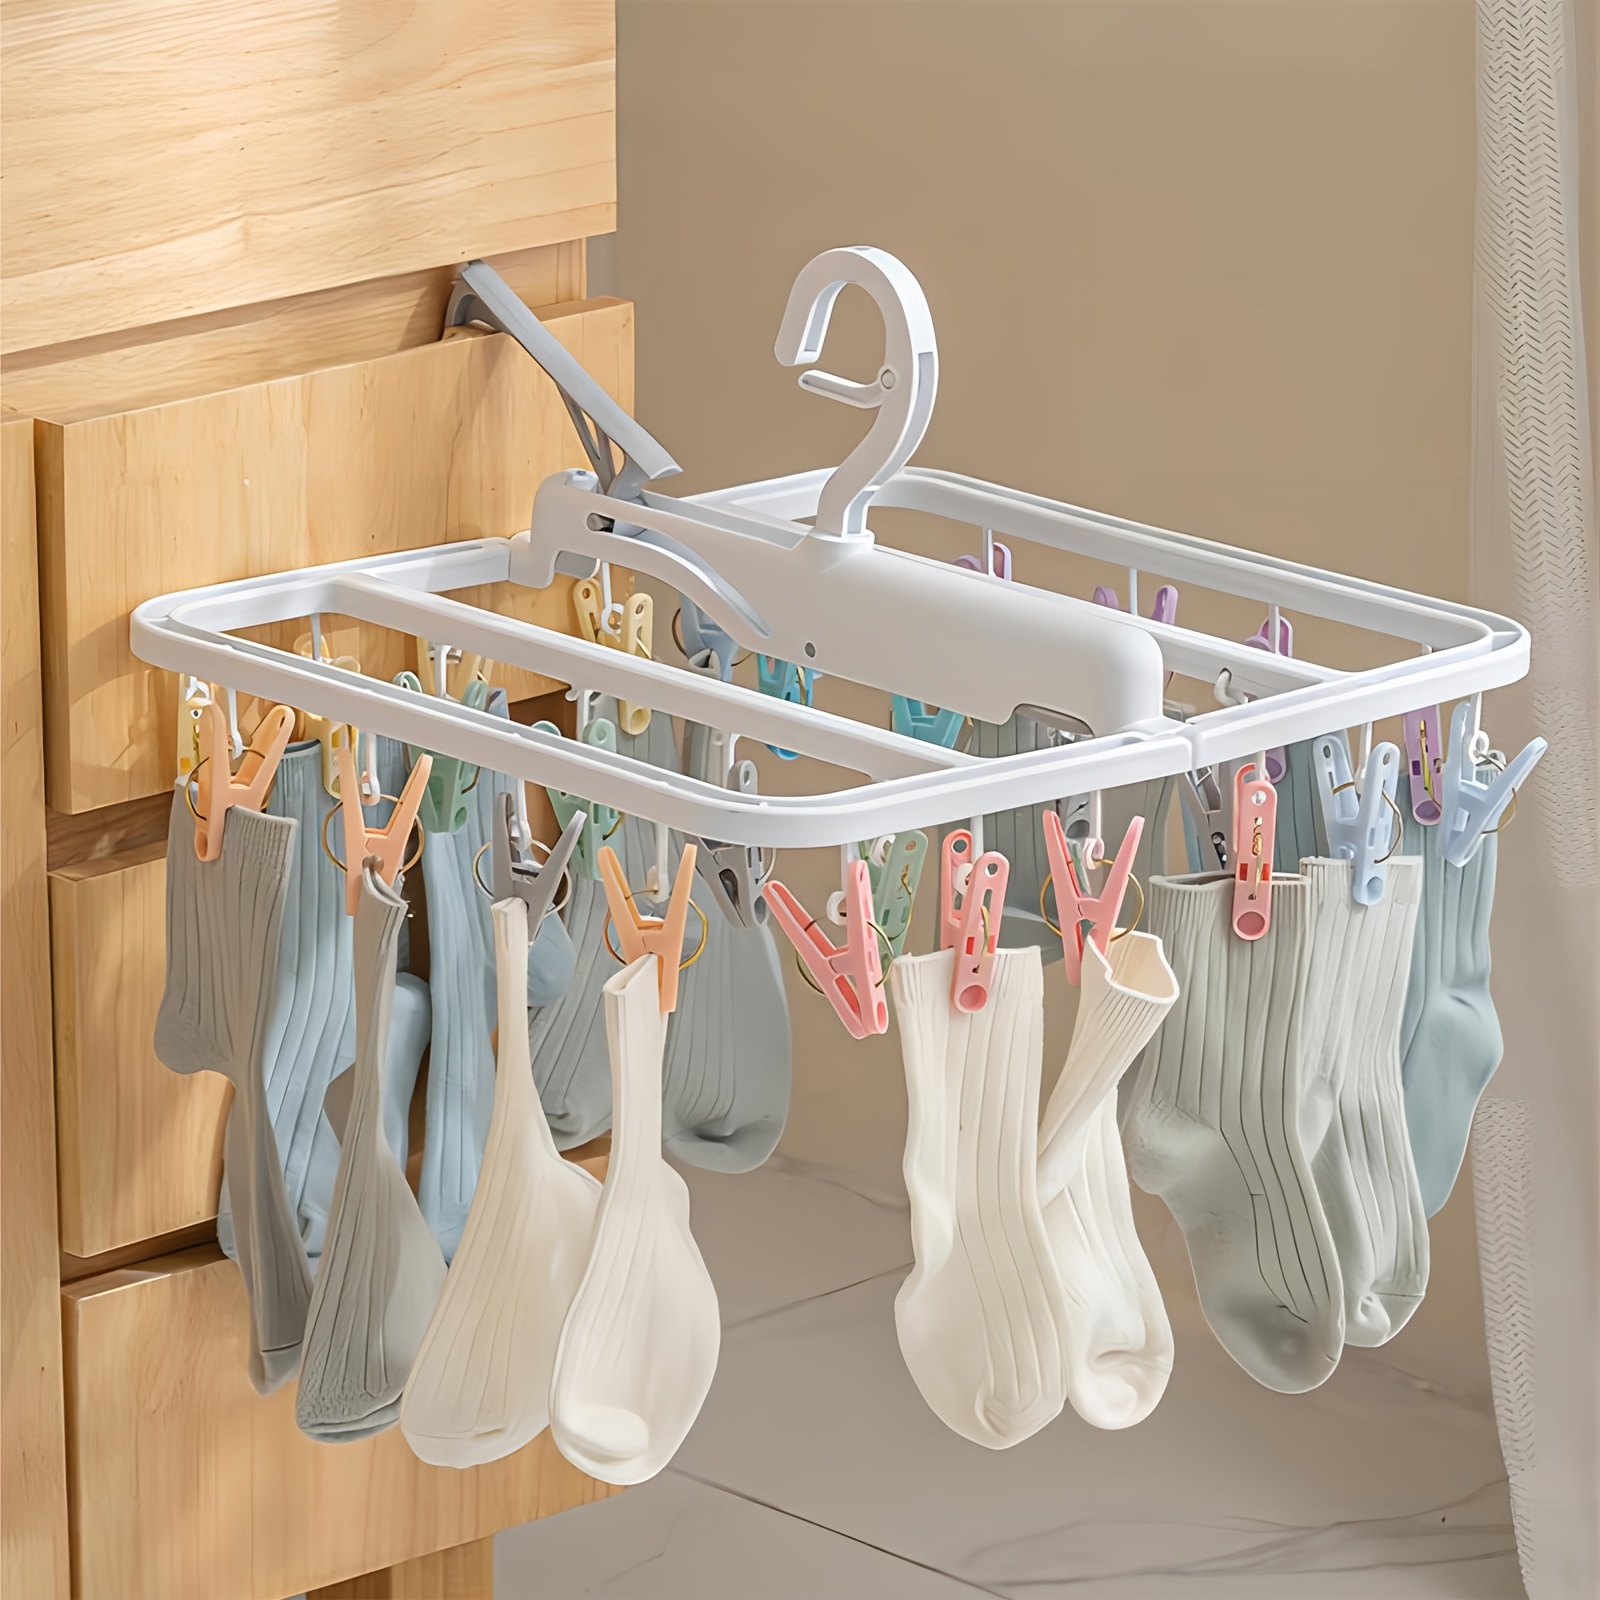 50 Sock Clips for Washing Machine and Dryer, Laundry Clips, Socks  Clothespin, Towel Clips for Washing, Sock Clip 